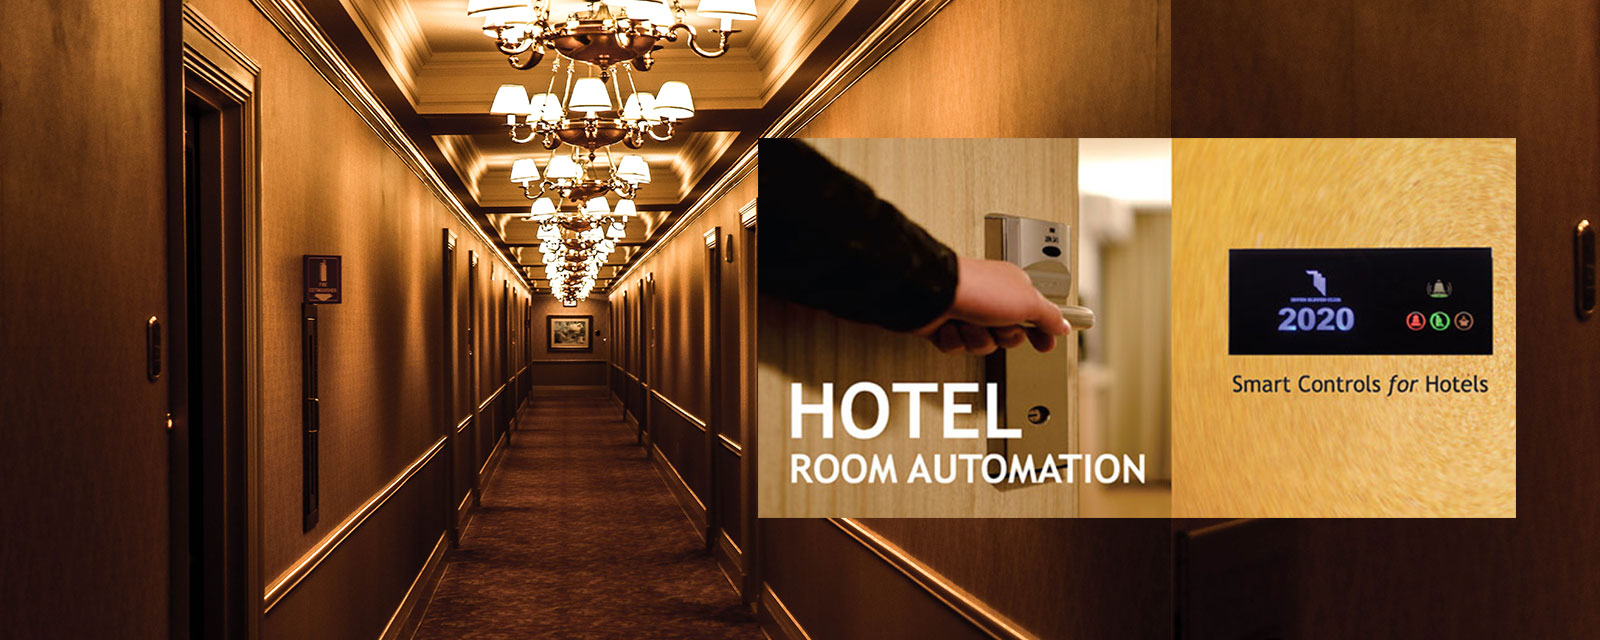 Hotel Room automation